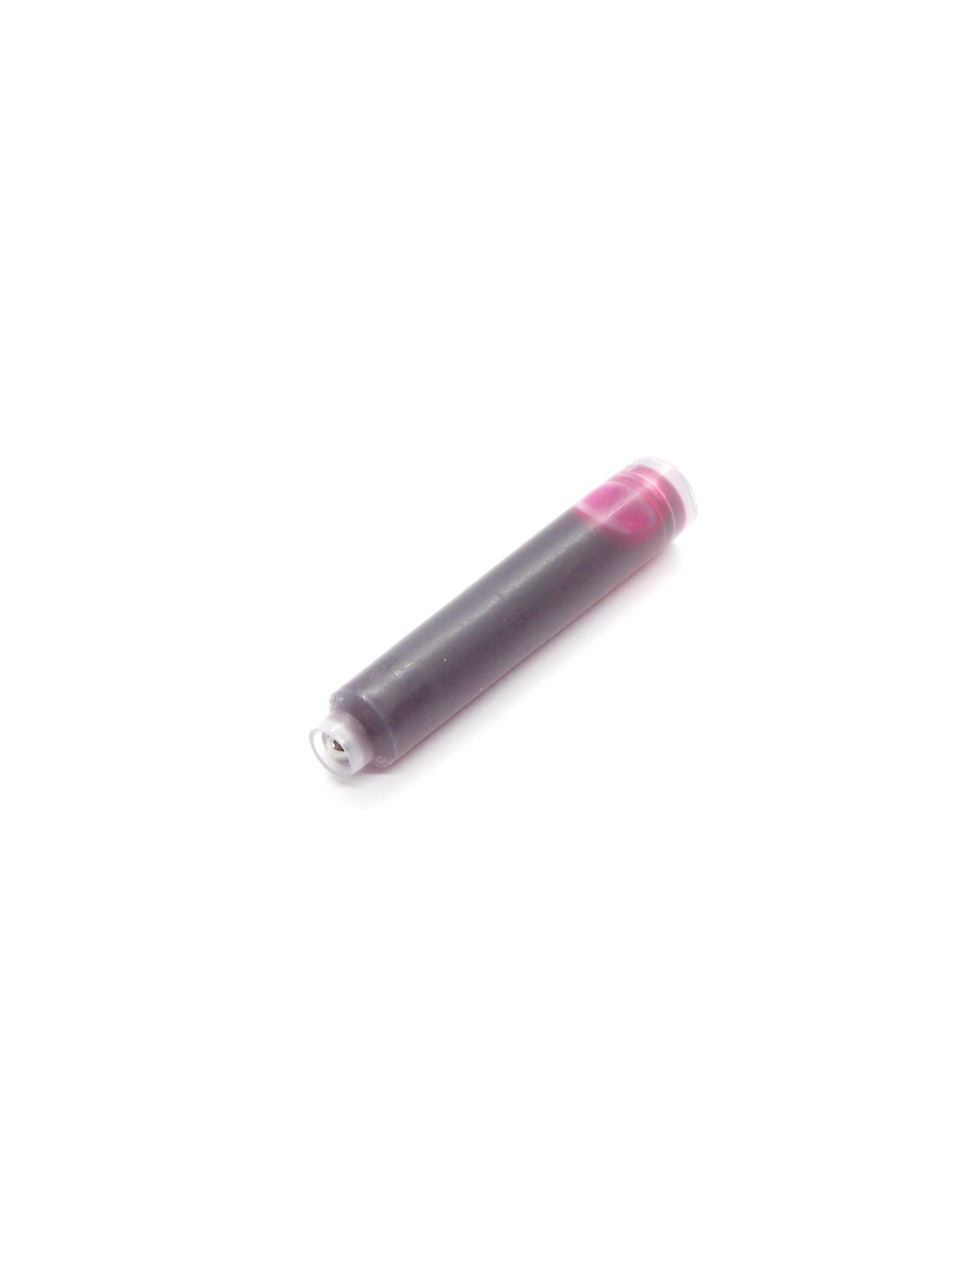 Cartridges For Yard O Led Fountain Pens (Pink)